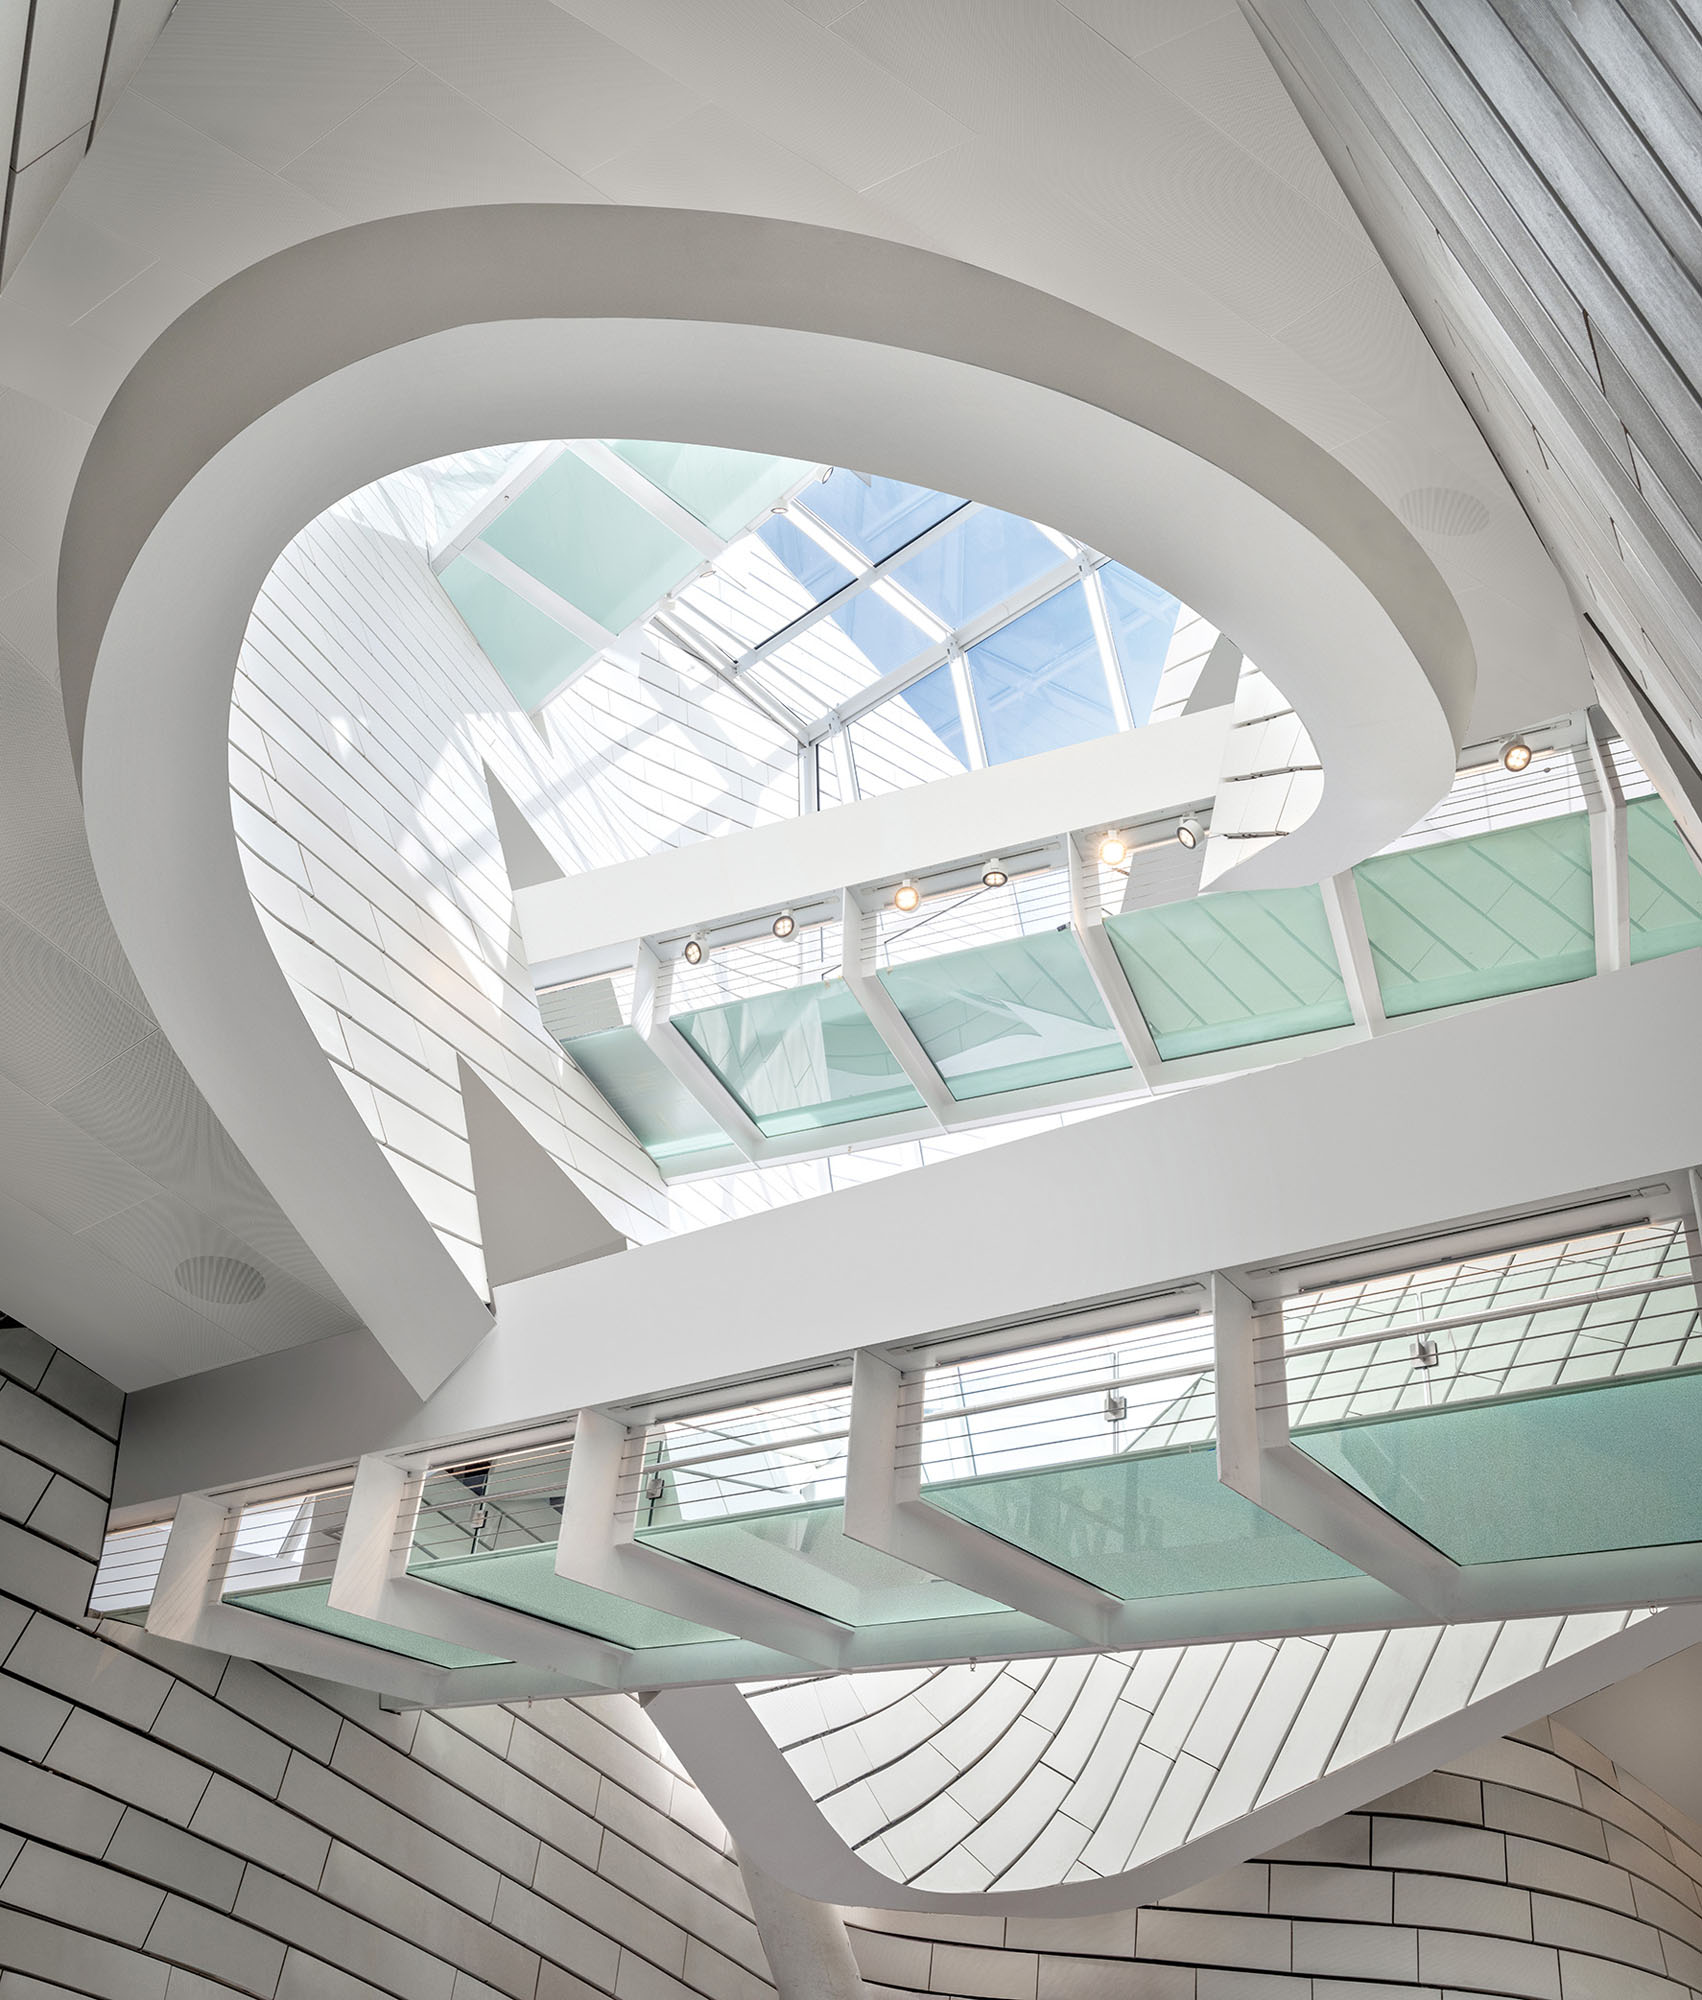 An interior photograph of the museum's atrium clad in tiles with a catwalk across it.